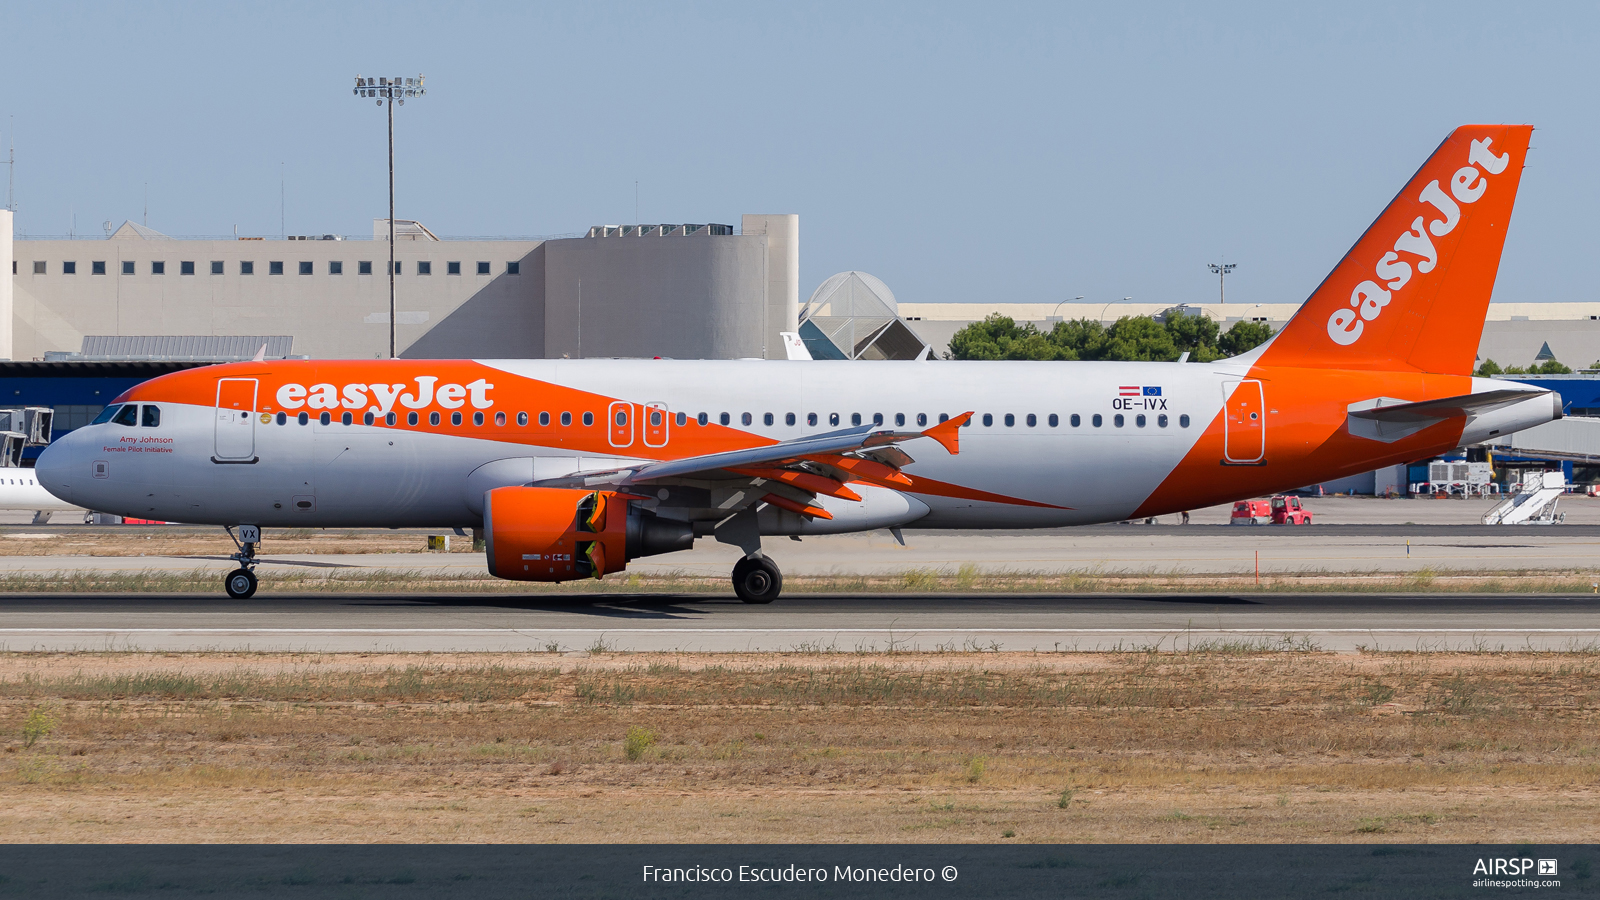 Easyjet  Airbus A320  OE-IVX